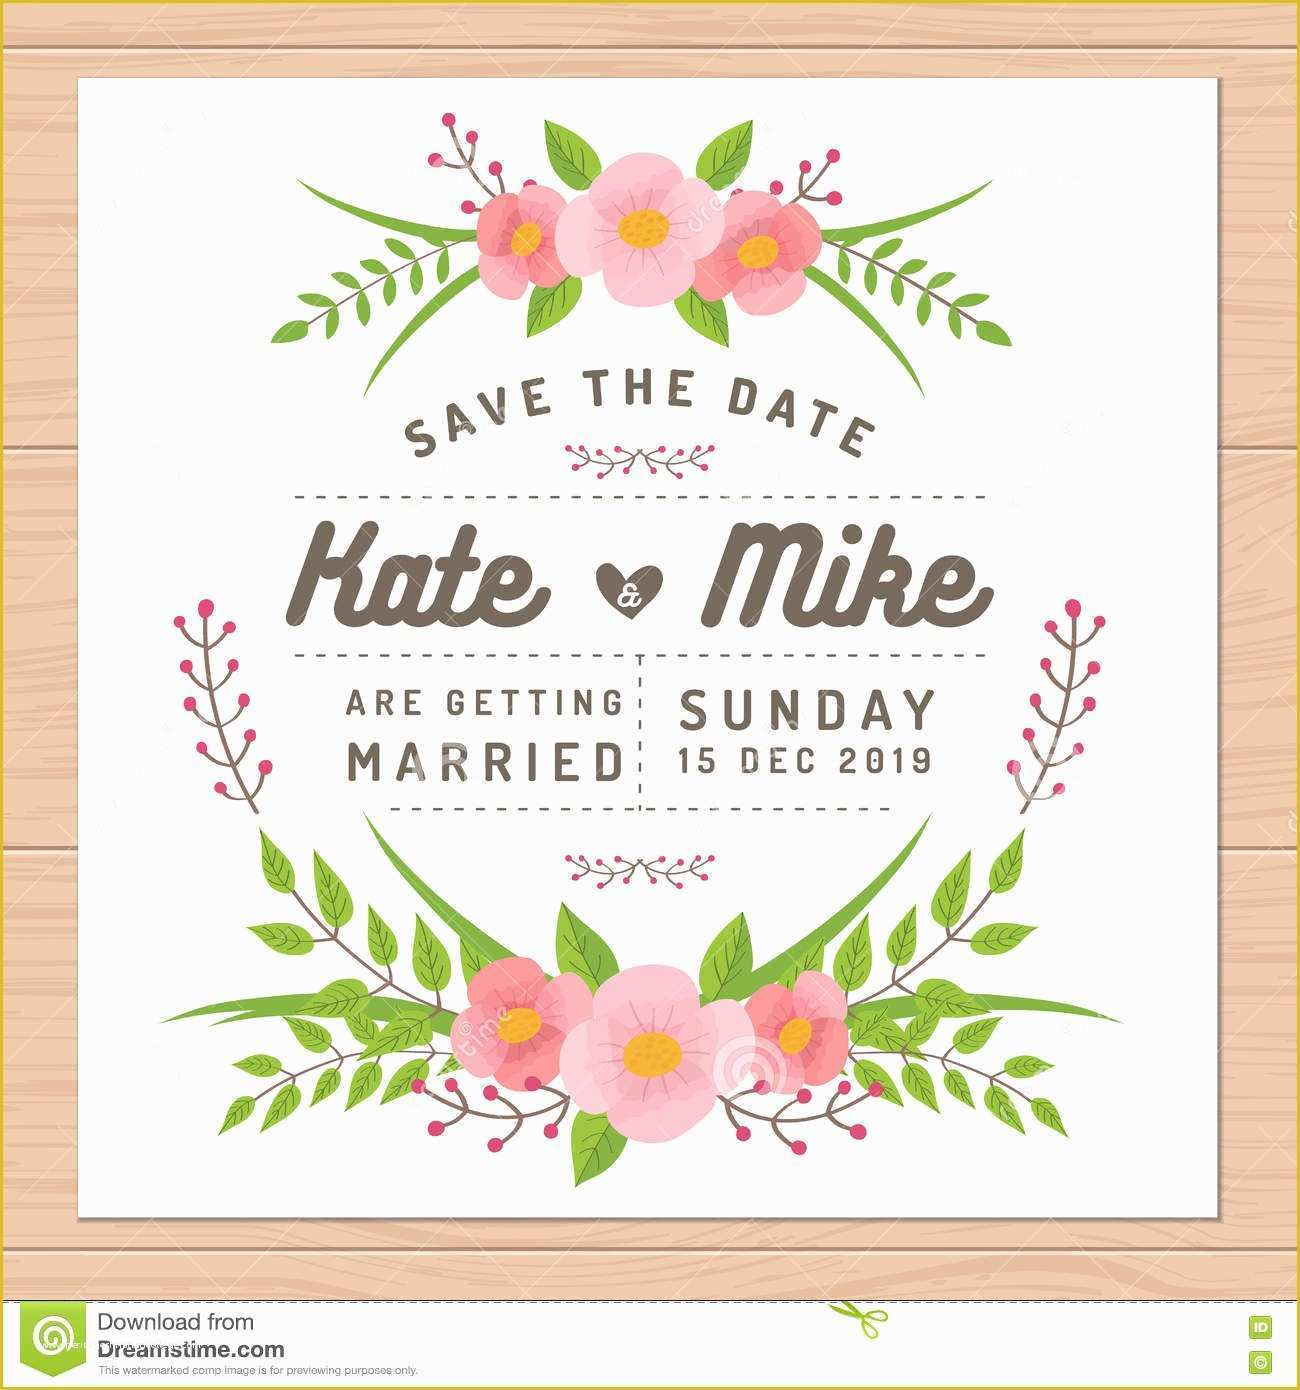 Save the Date Powerpoint Template Free Of Flower Invitation Templates